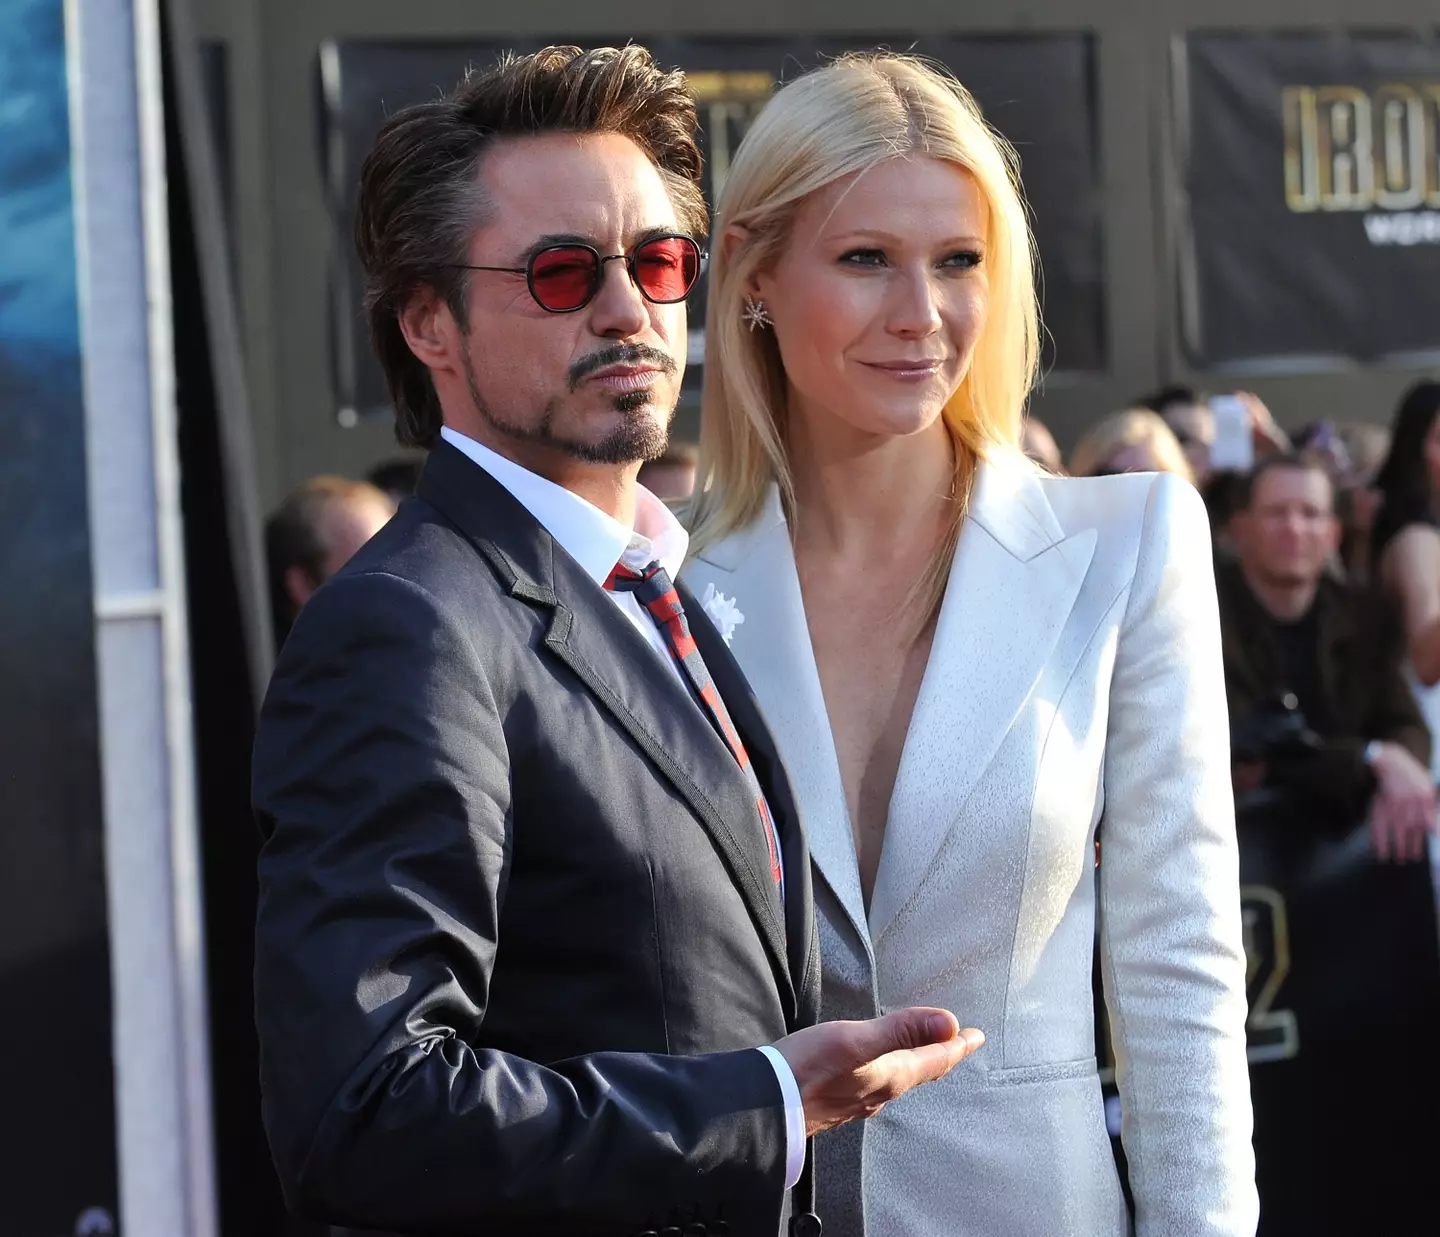 Gwyneth Paltrow and Robert Downey Jr. have been friends for years.